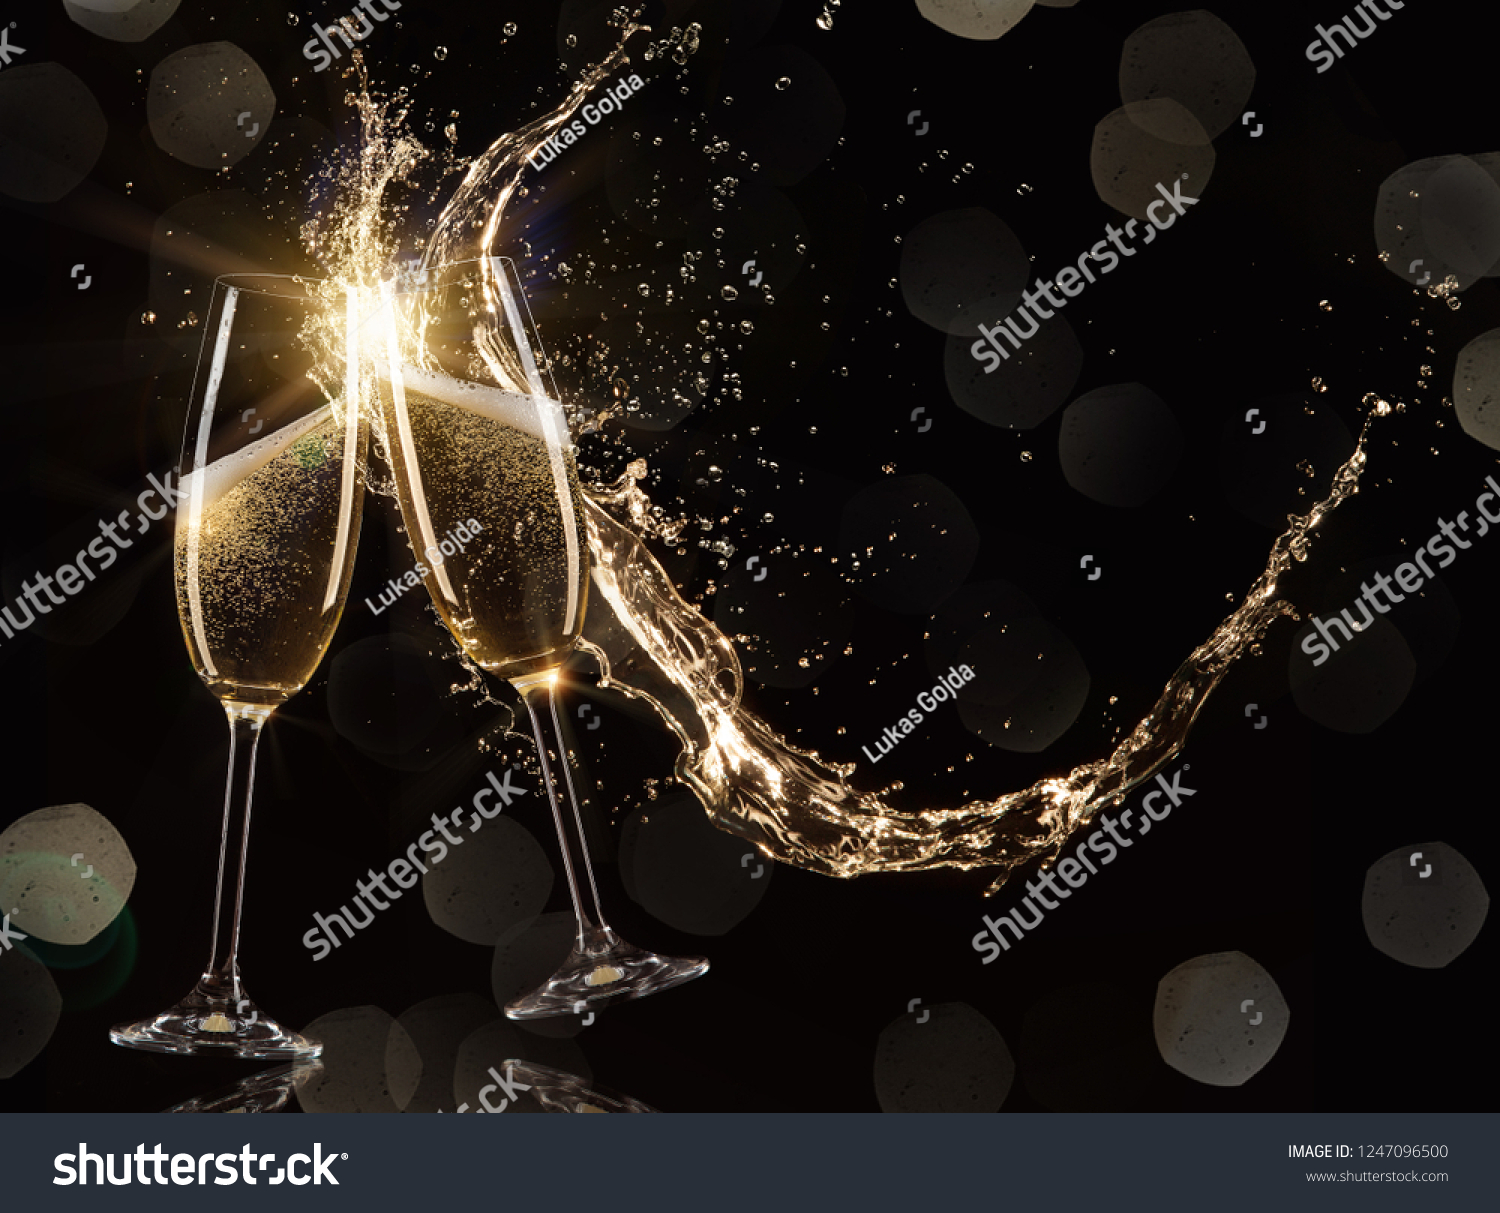 Glasses of champagne levitating in the air, celebration theme. #1247096500